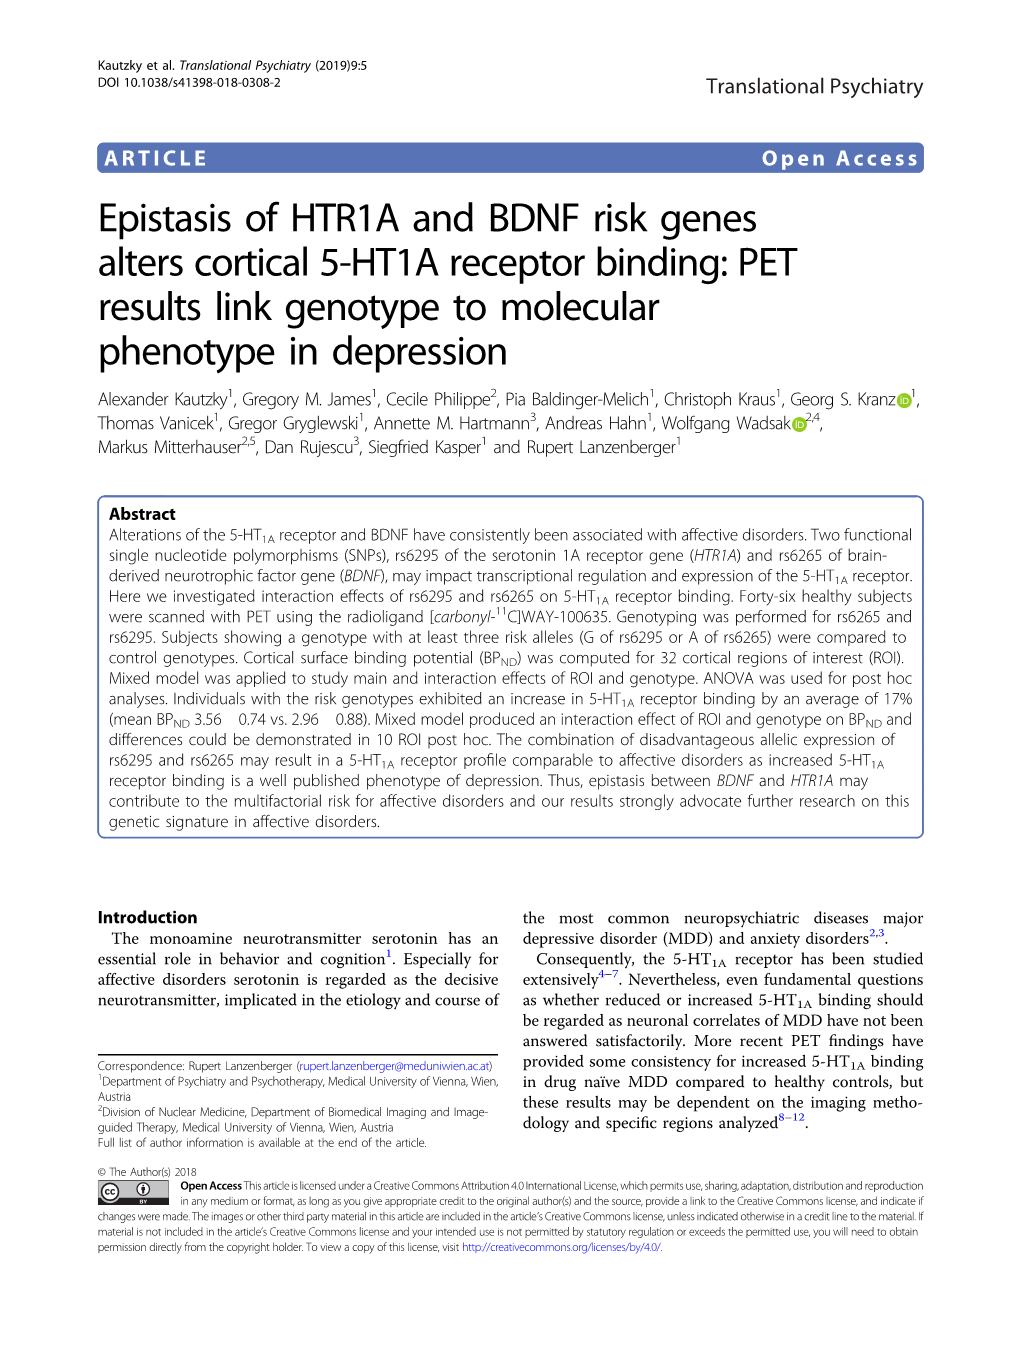 Epistasis of HTR1A and BDNF Risk Genes Alters Cortical 5